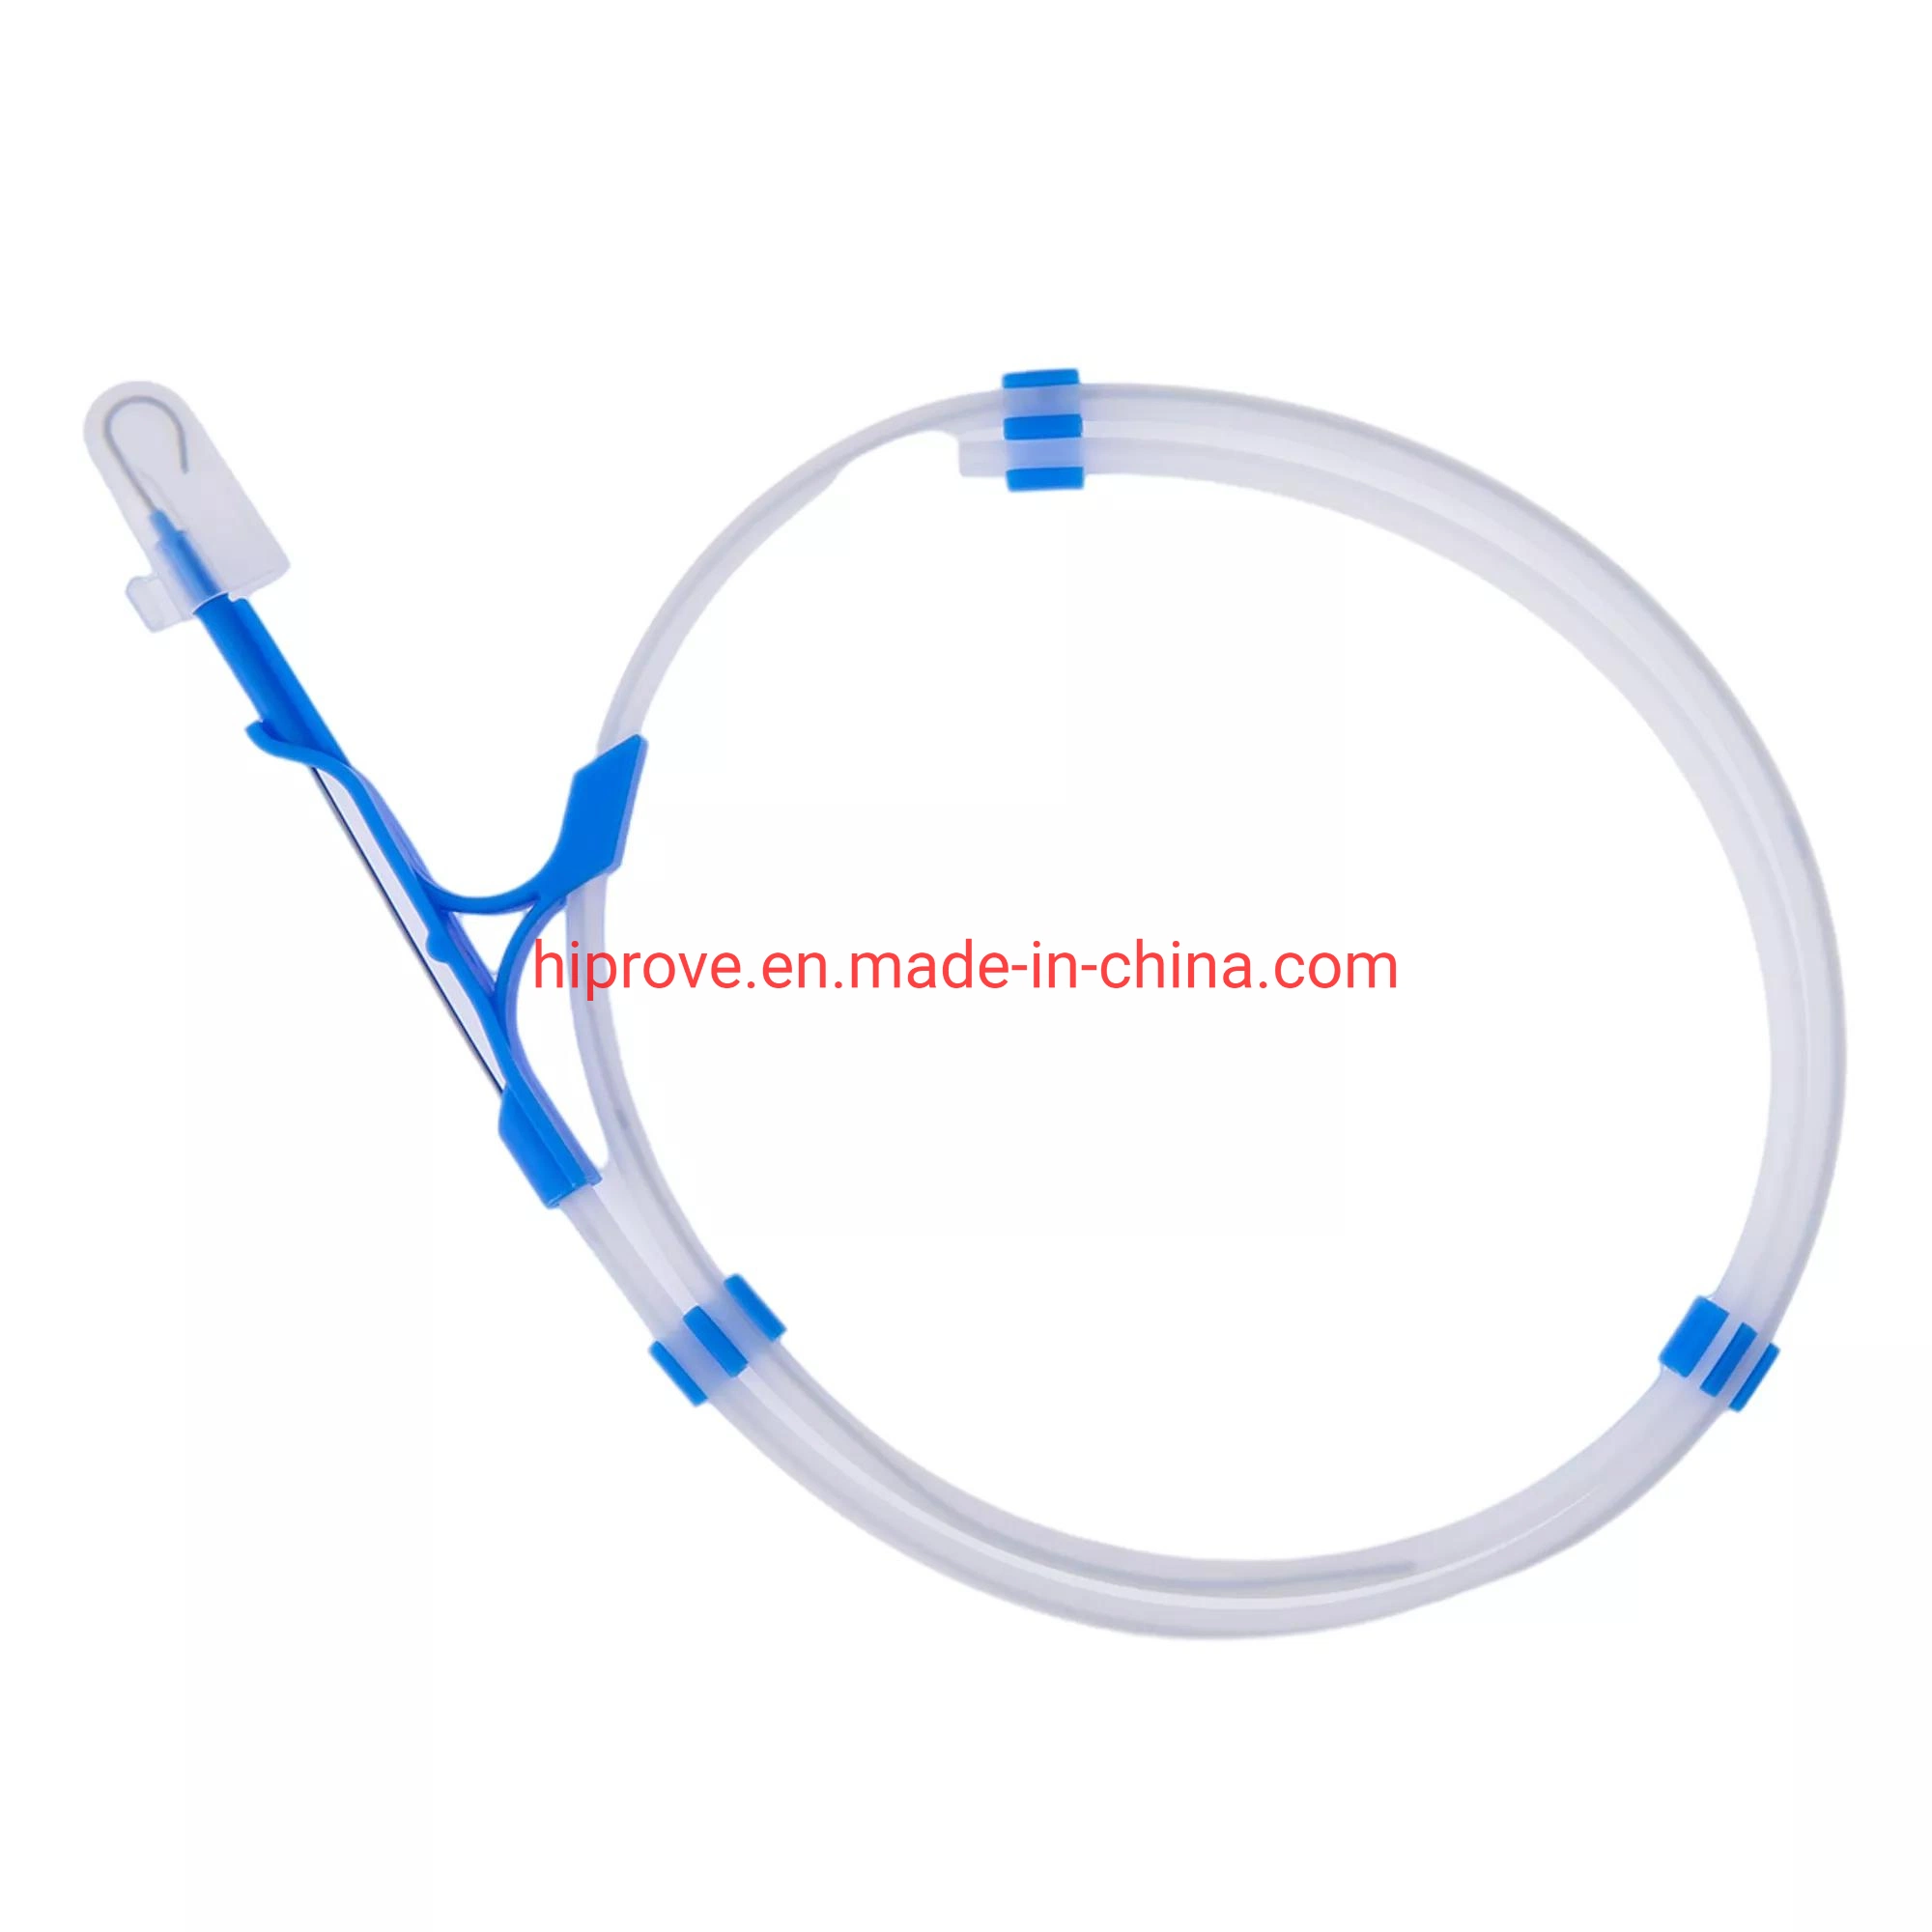 Medical Hydrophilic PTFE Coated Nitinol J Tip Catheter Guide Wire